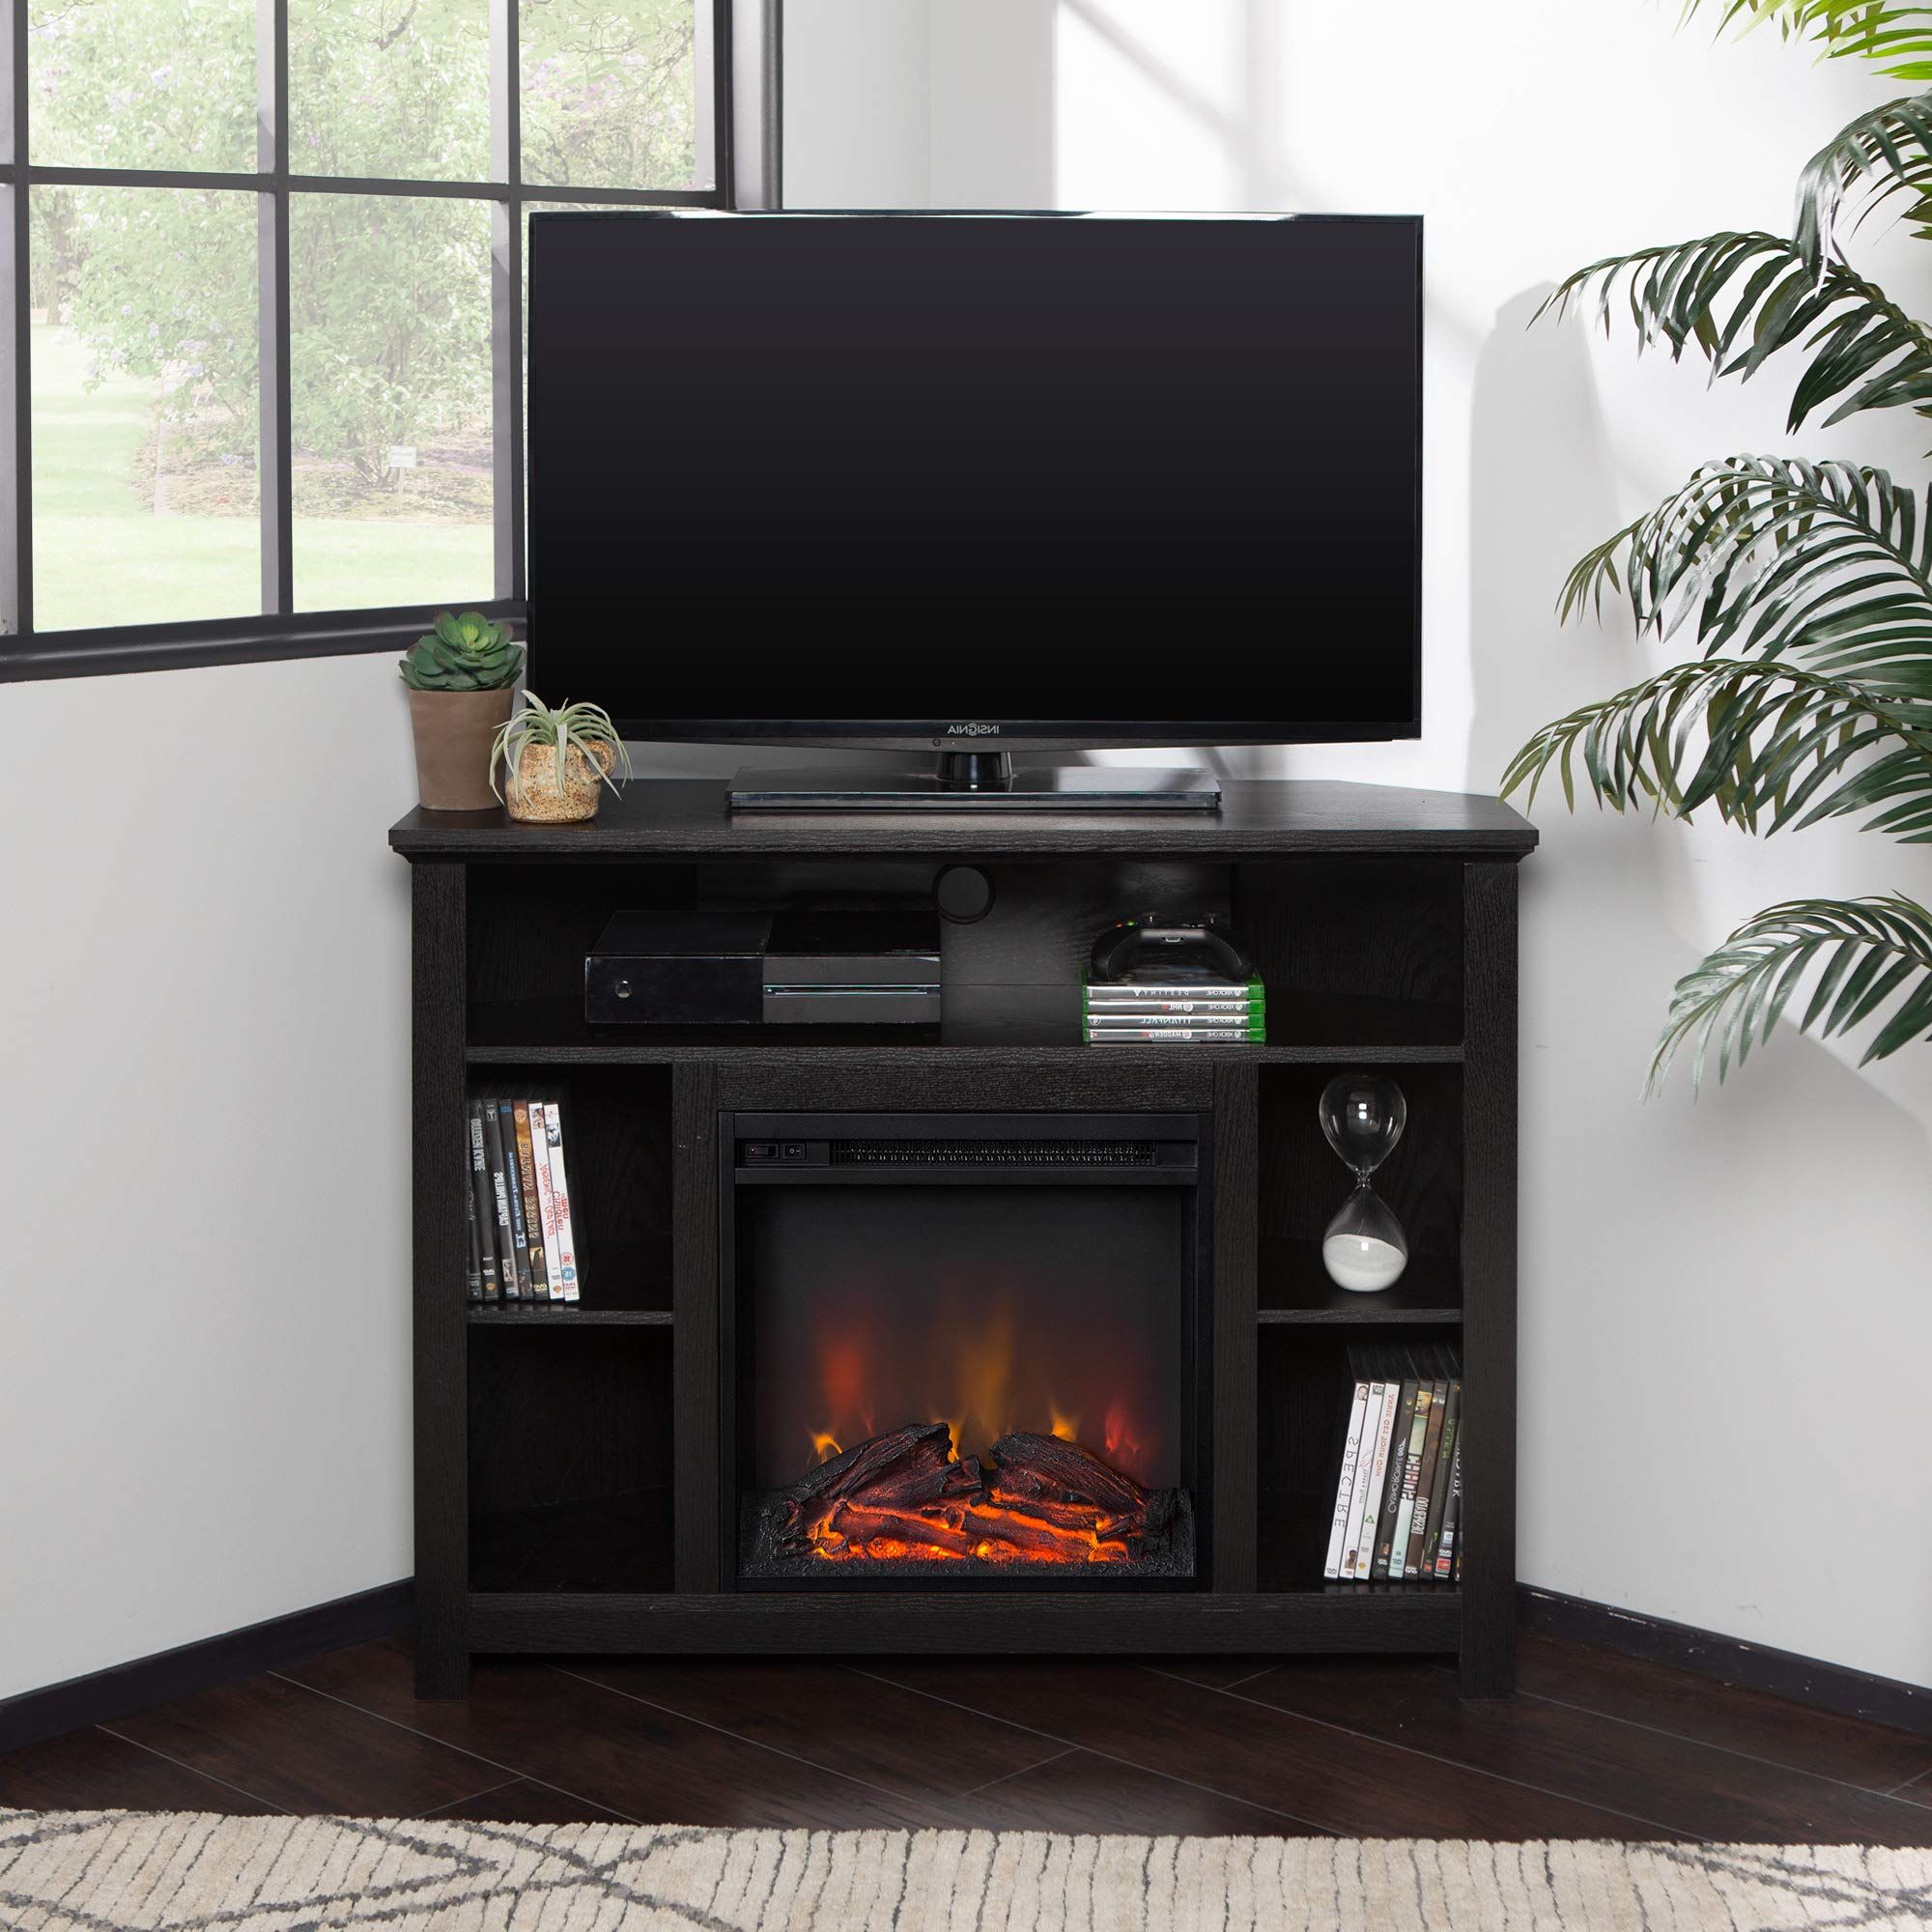 2017 Amazon: Home Accent Furnishings 44" Wood Corner Fireplace Tv Stand –  Black : Home & Kitchen Within Black Accent Tv Stands (View 5 of 10)